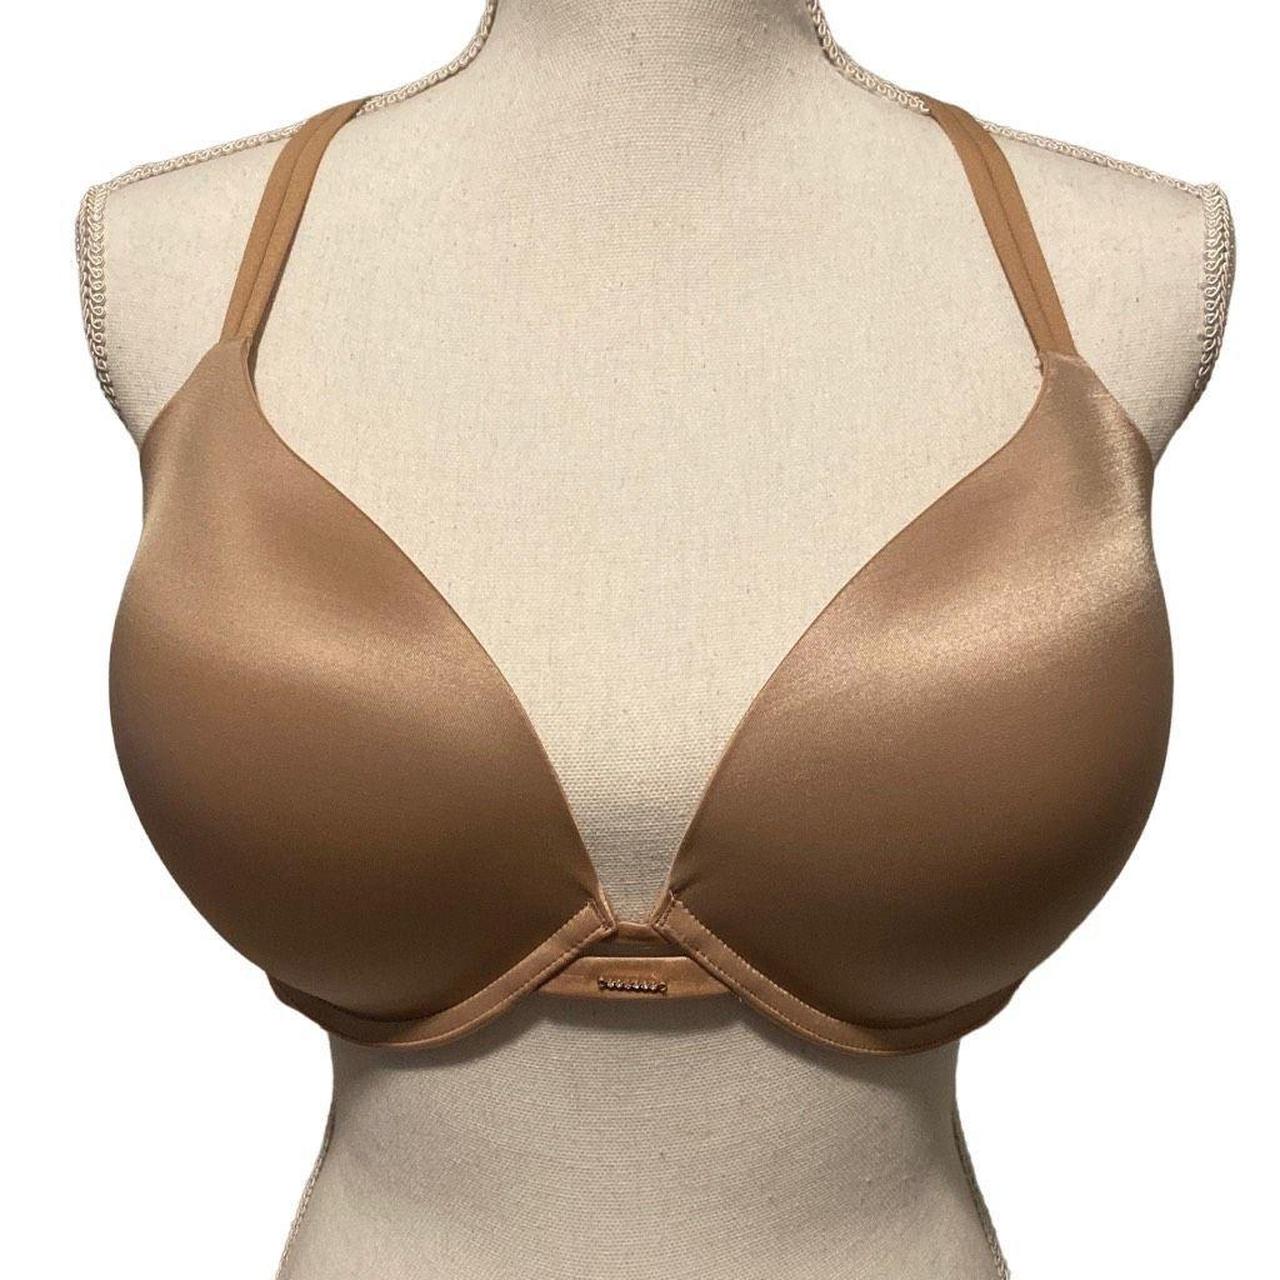 Excellent new without tags nude Victoria's Secret